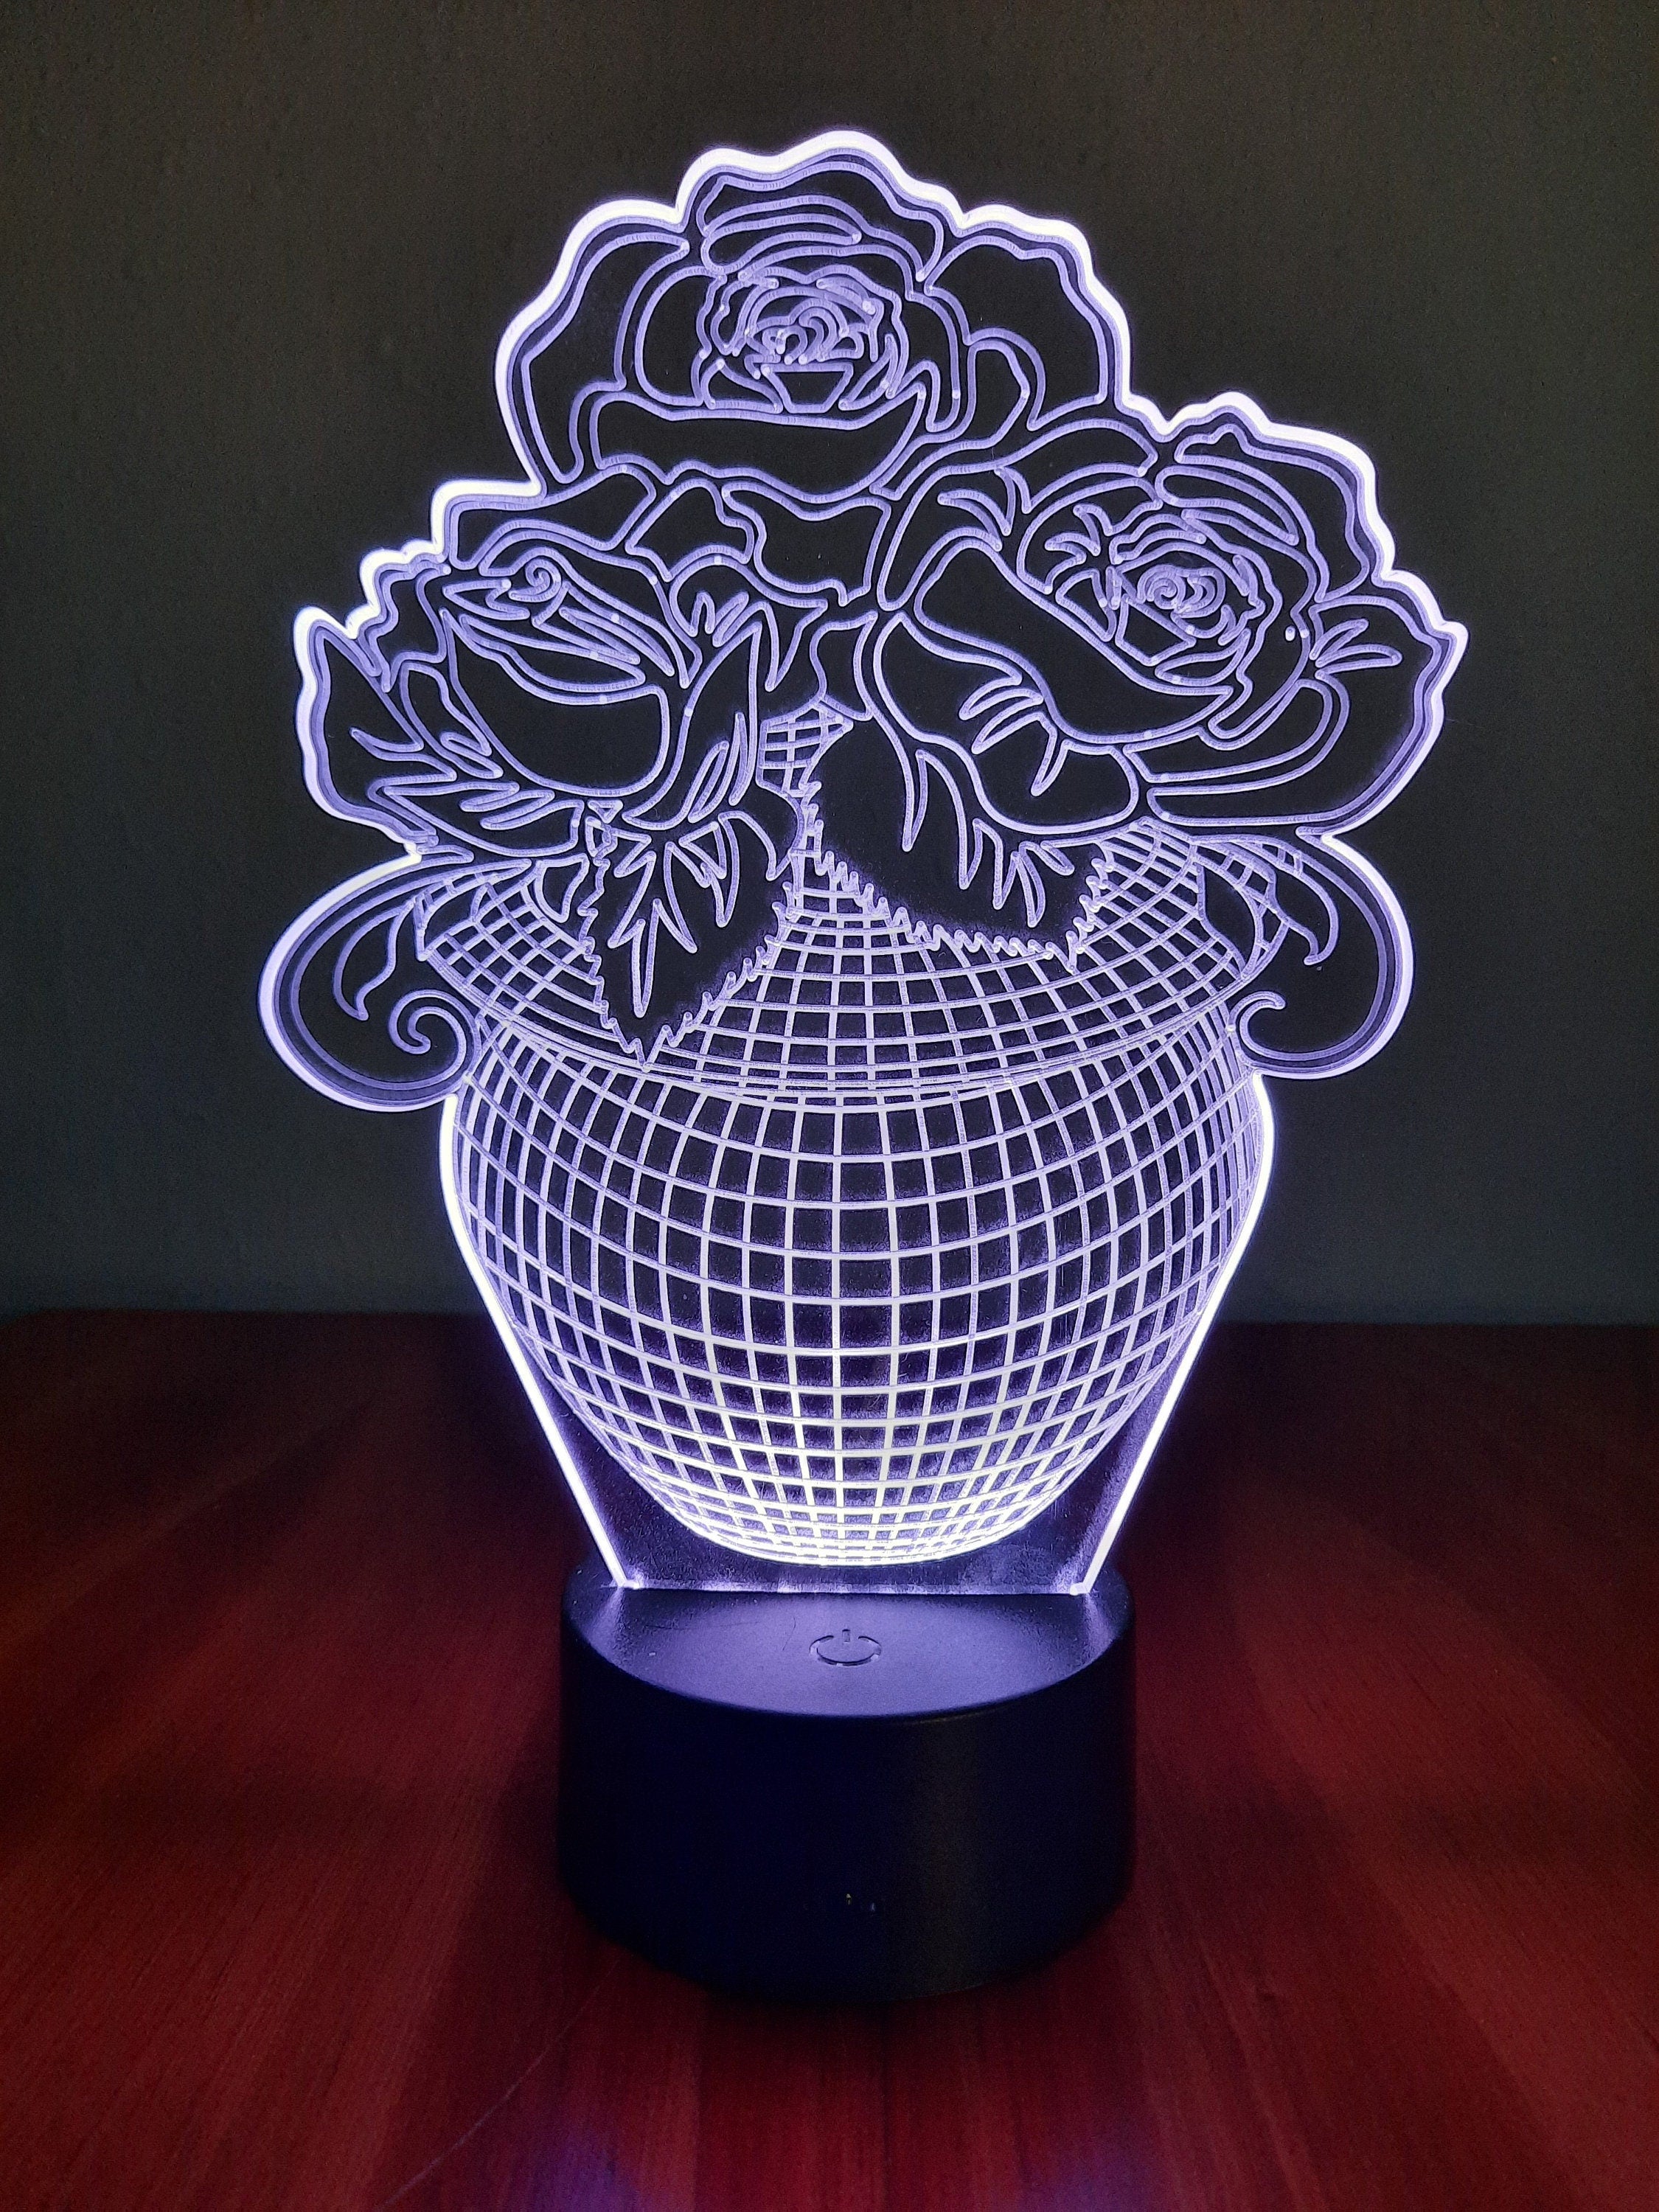 Awesome "Bowl of Roses" 3D LED Lamp (1139) - FREE SHIPPING!